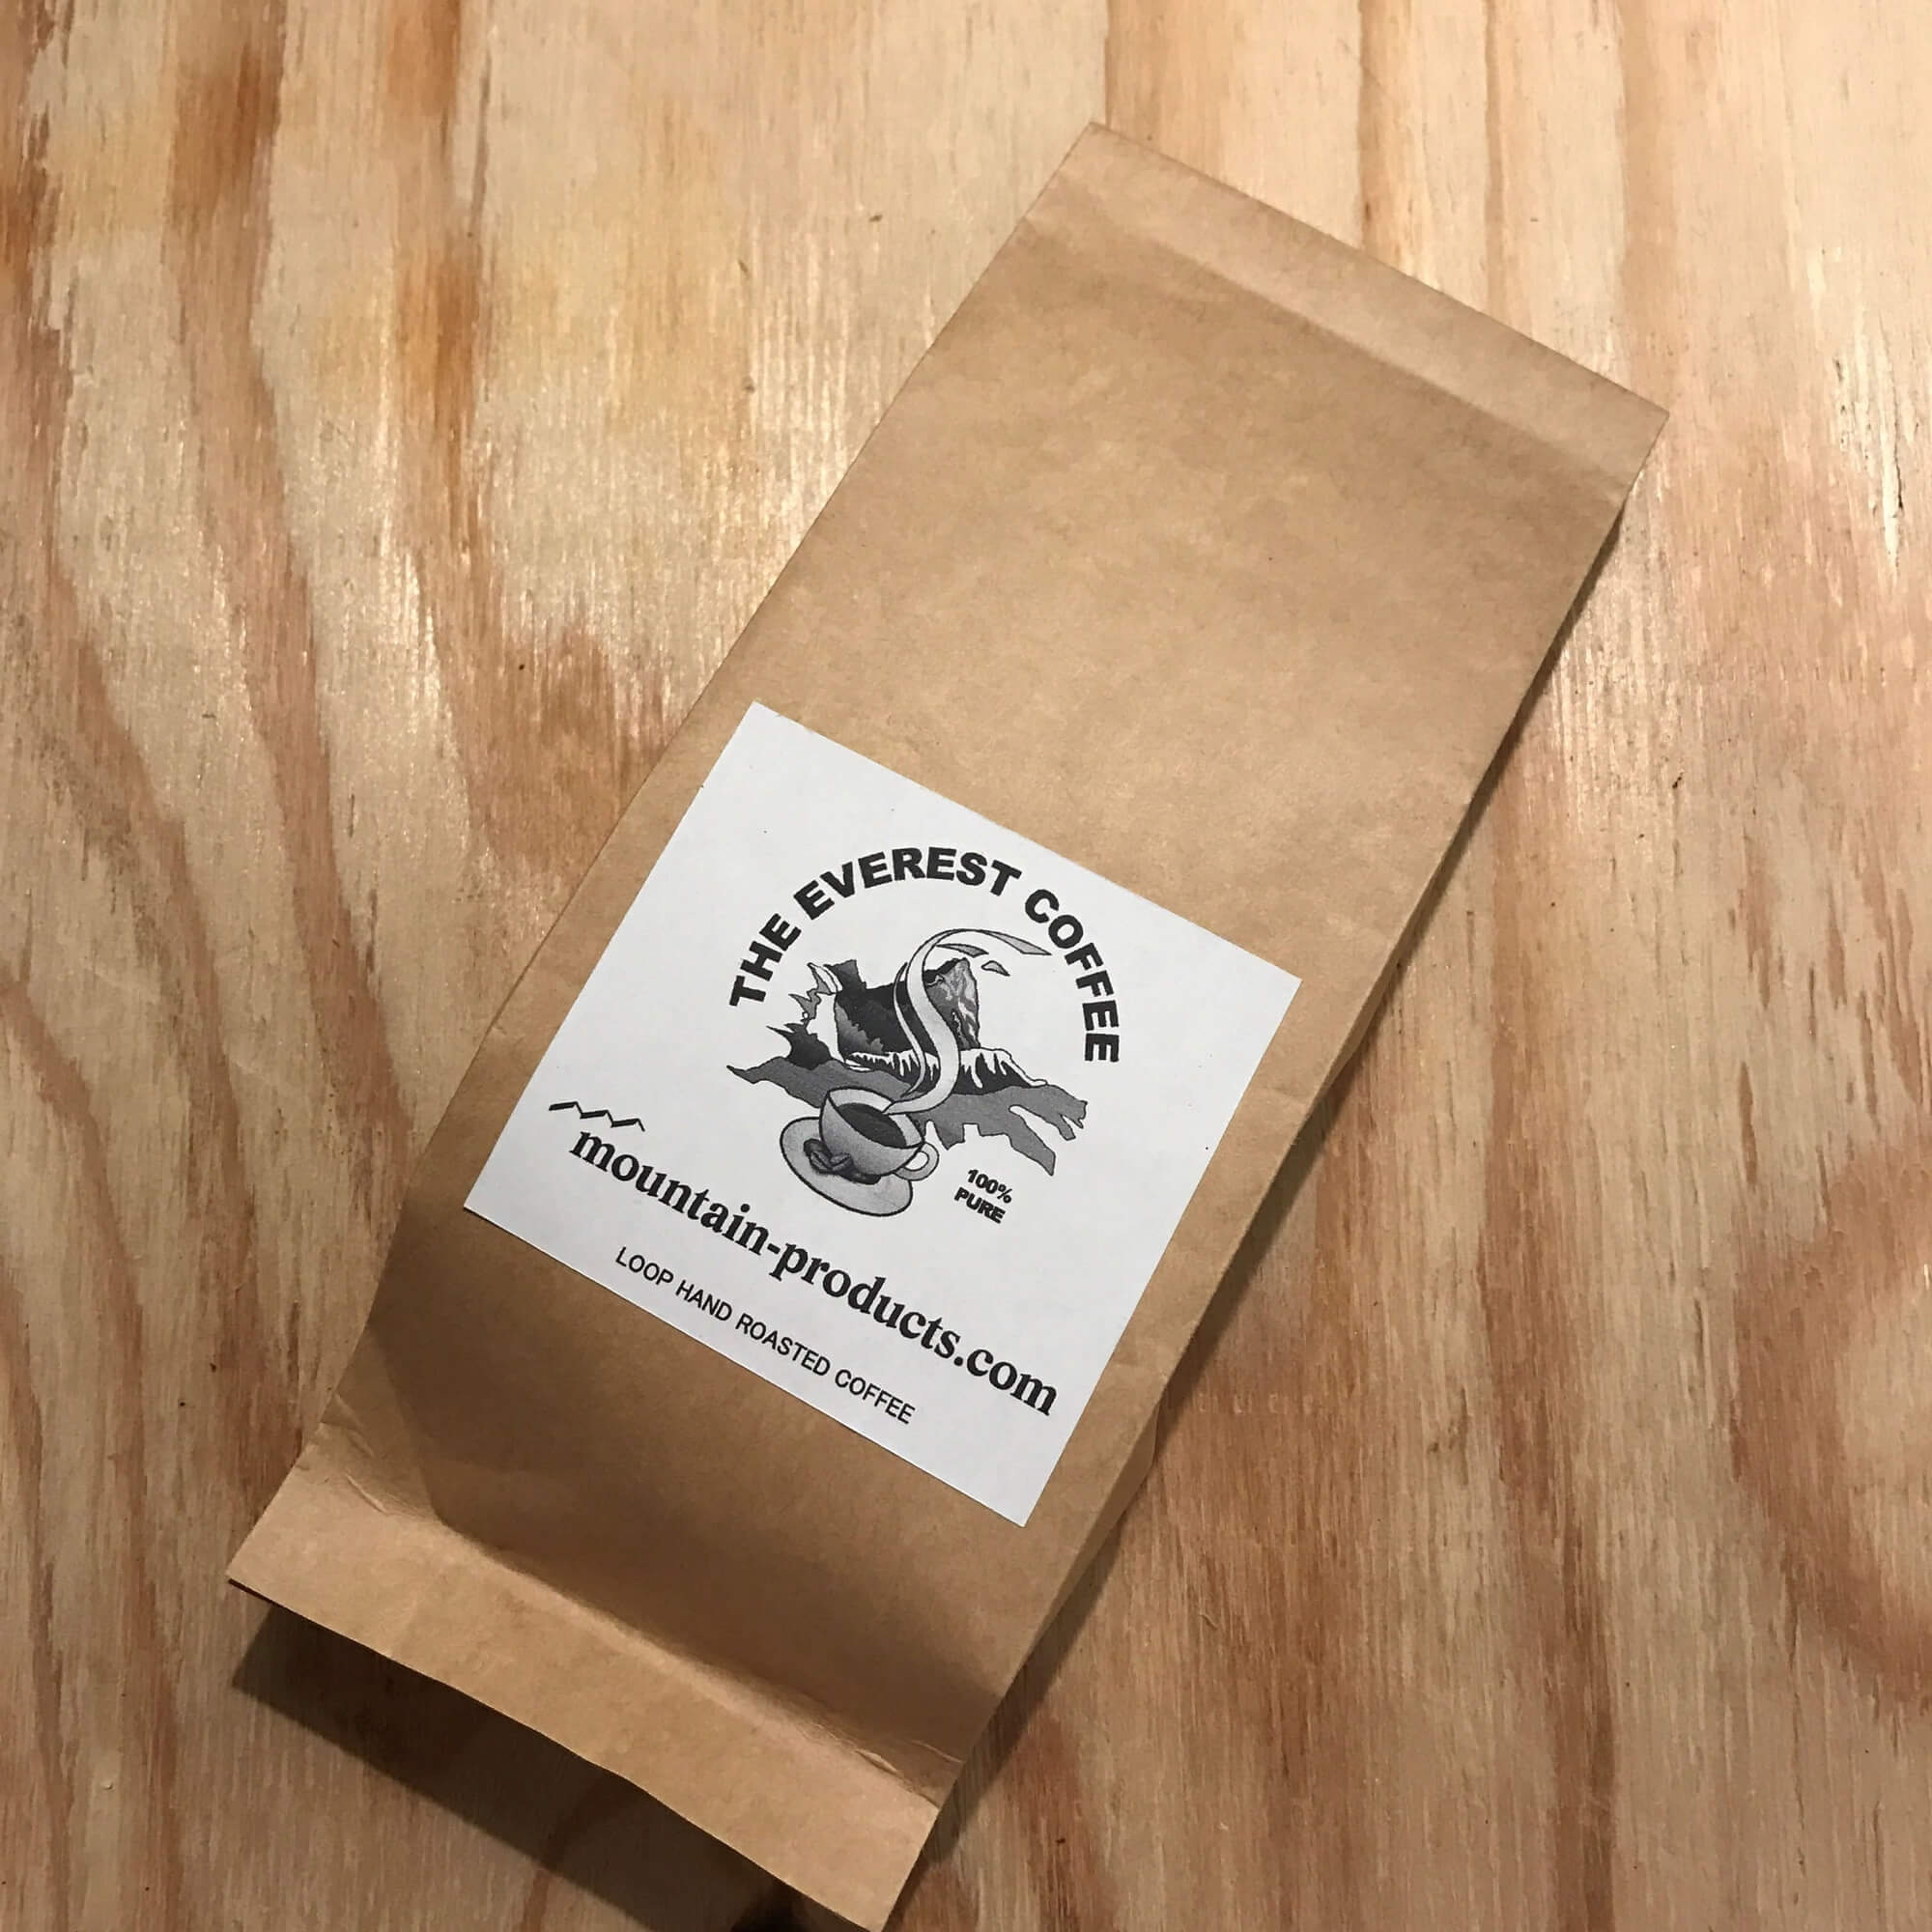 THE EVEREST COFFEE  Roasted beans 200g package 粉